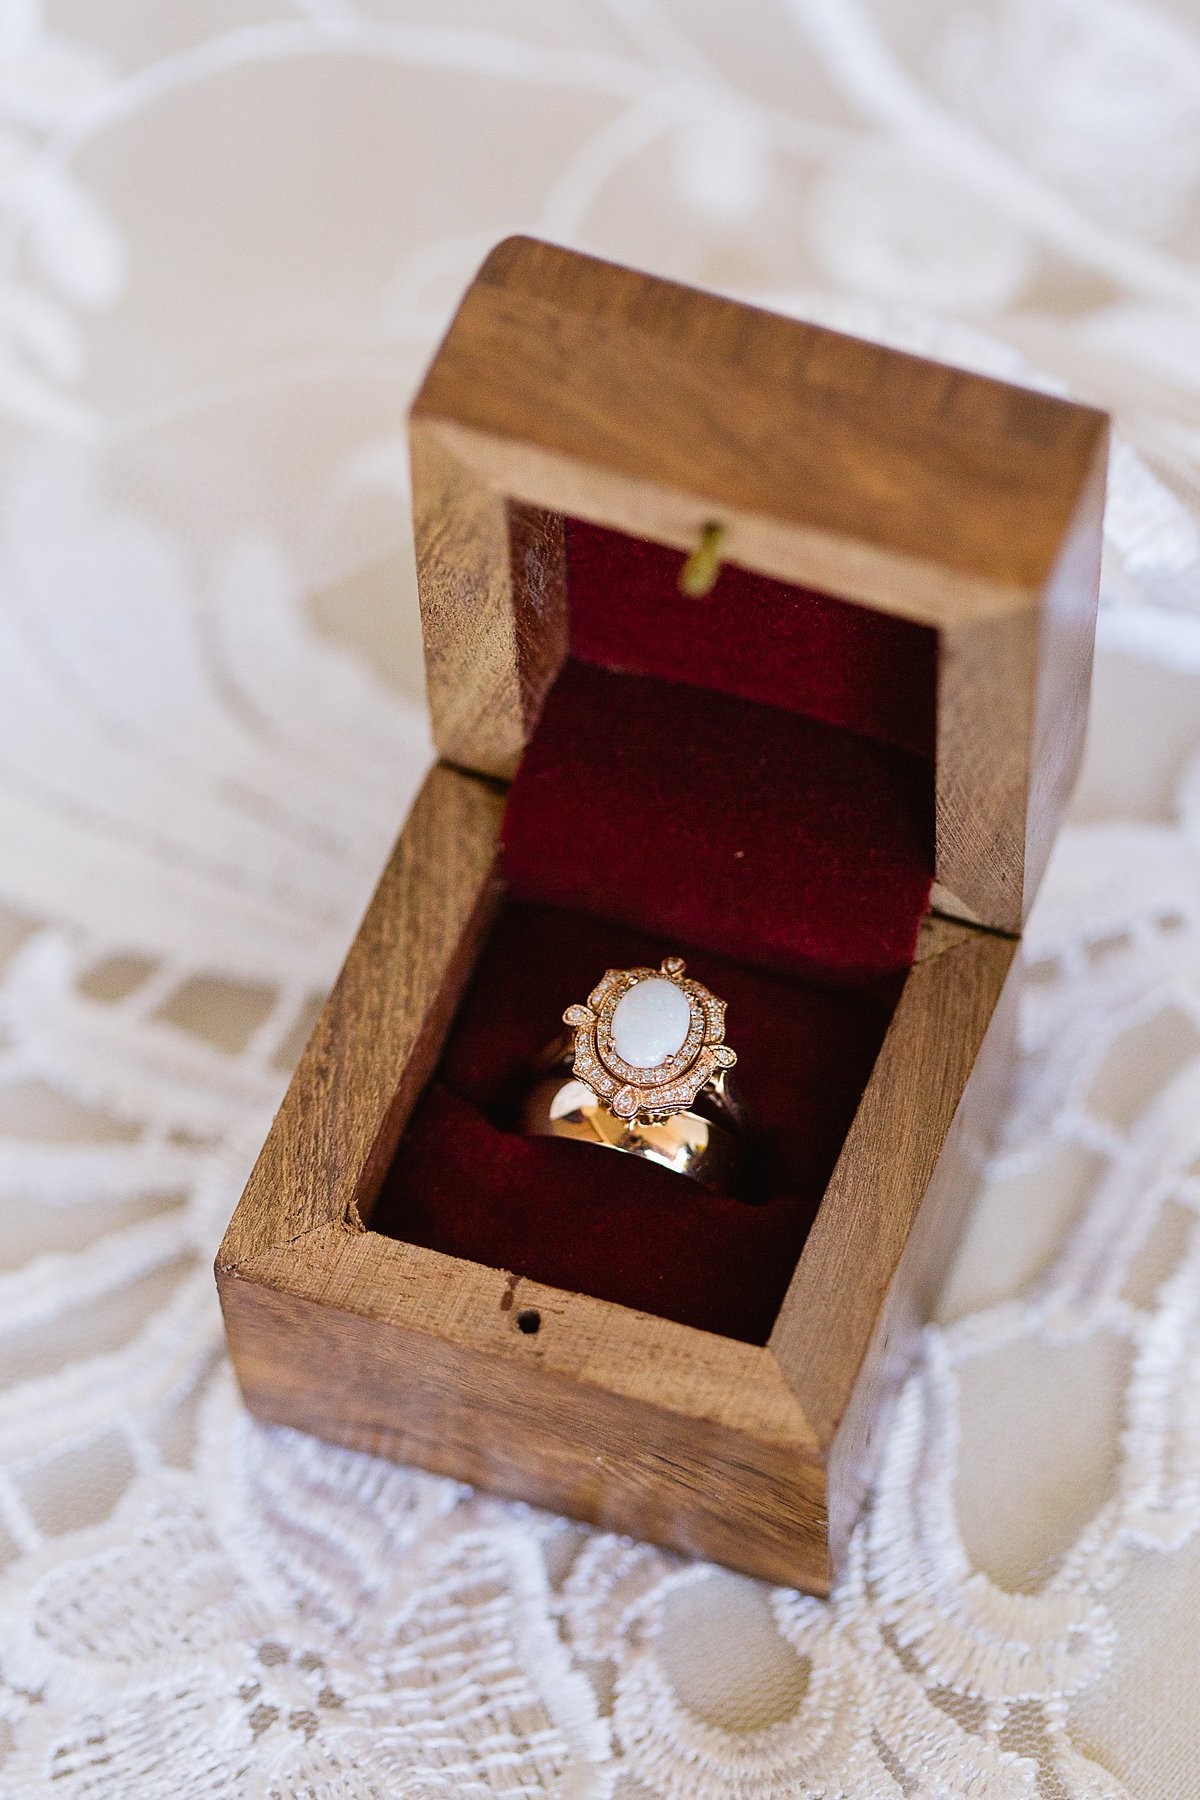 Rose gold and opal unique, alternative wedding ring in a wooden box by PMA Photography.